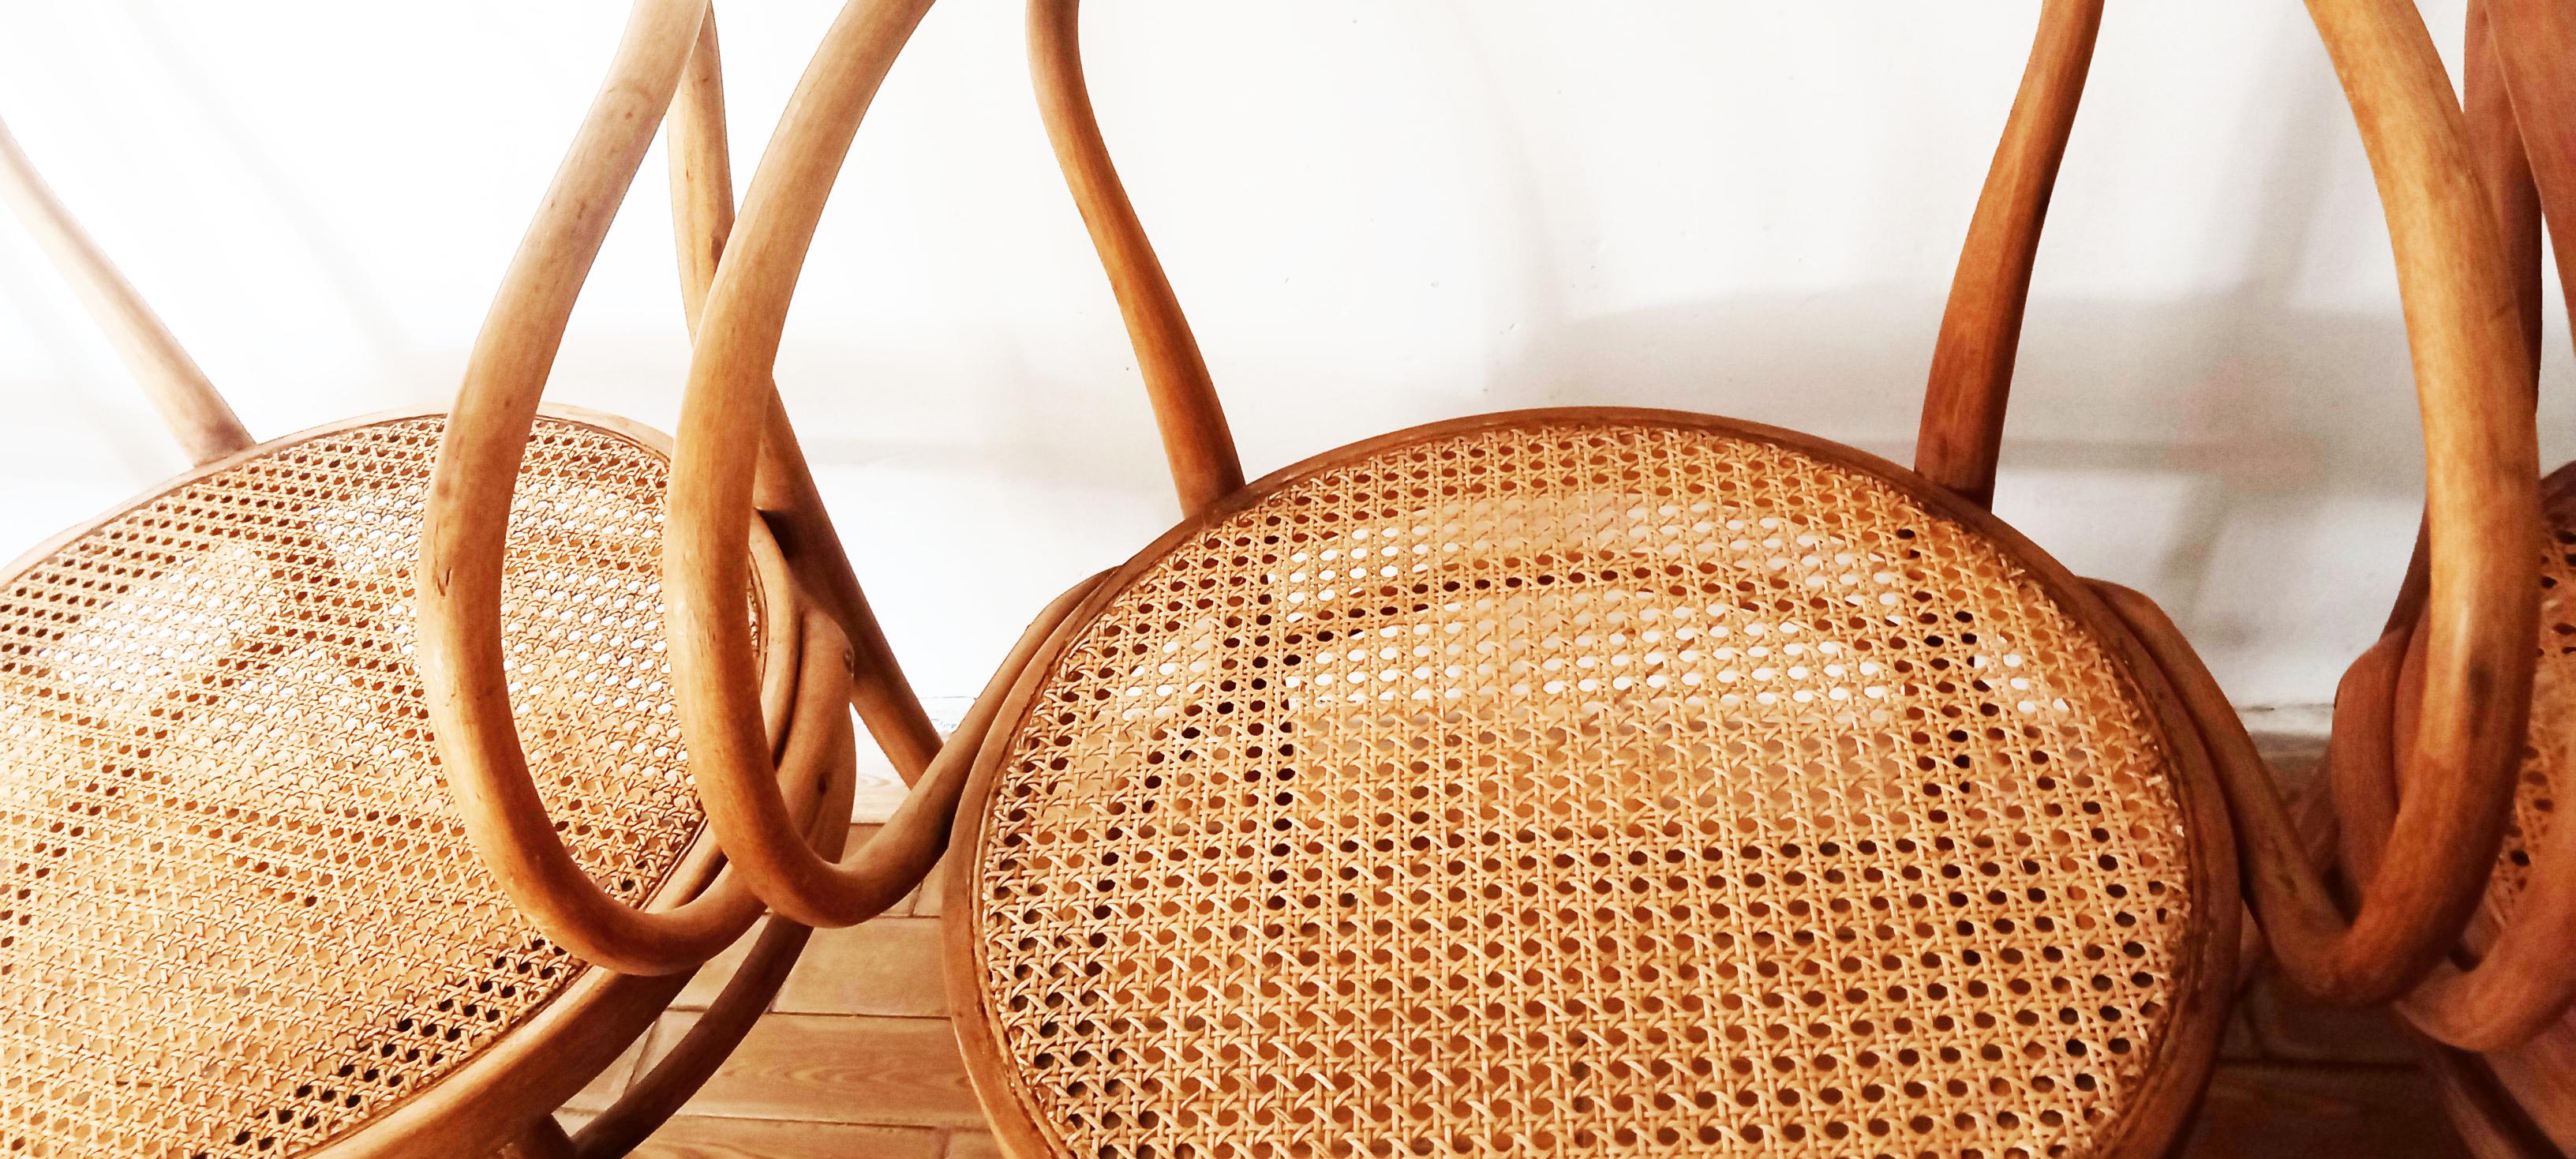 20th Century Six Midcentury Cane Bentwood Chair After Thonet 209, 1950s For Sale